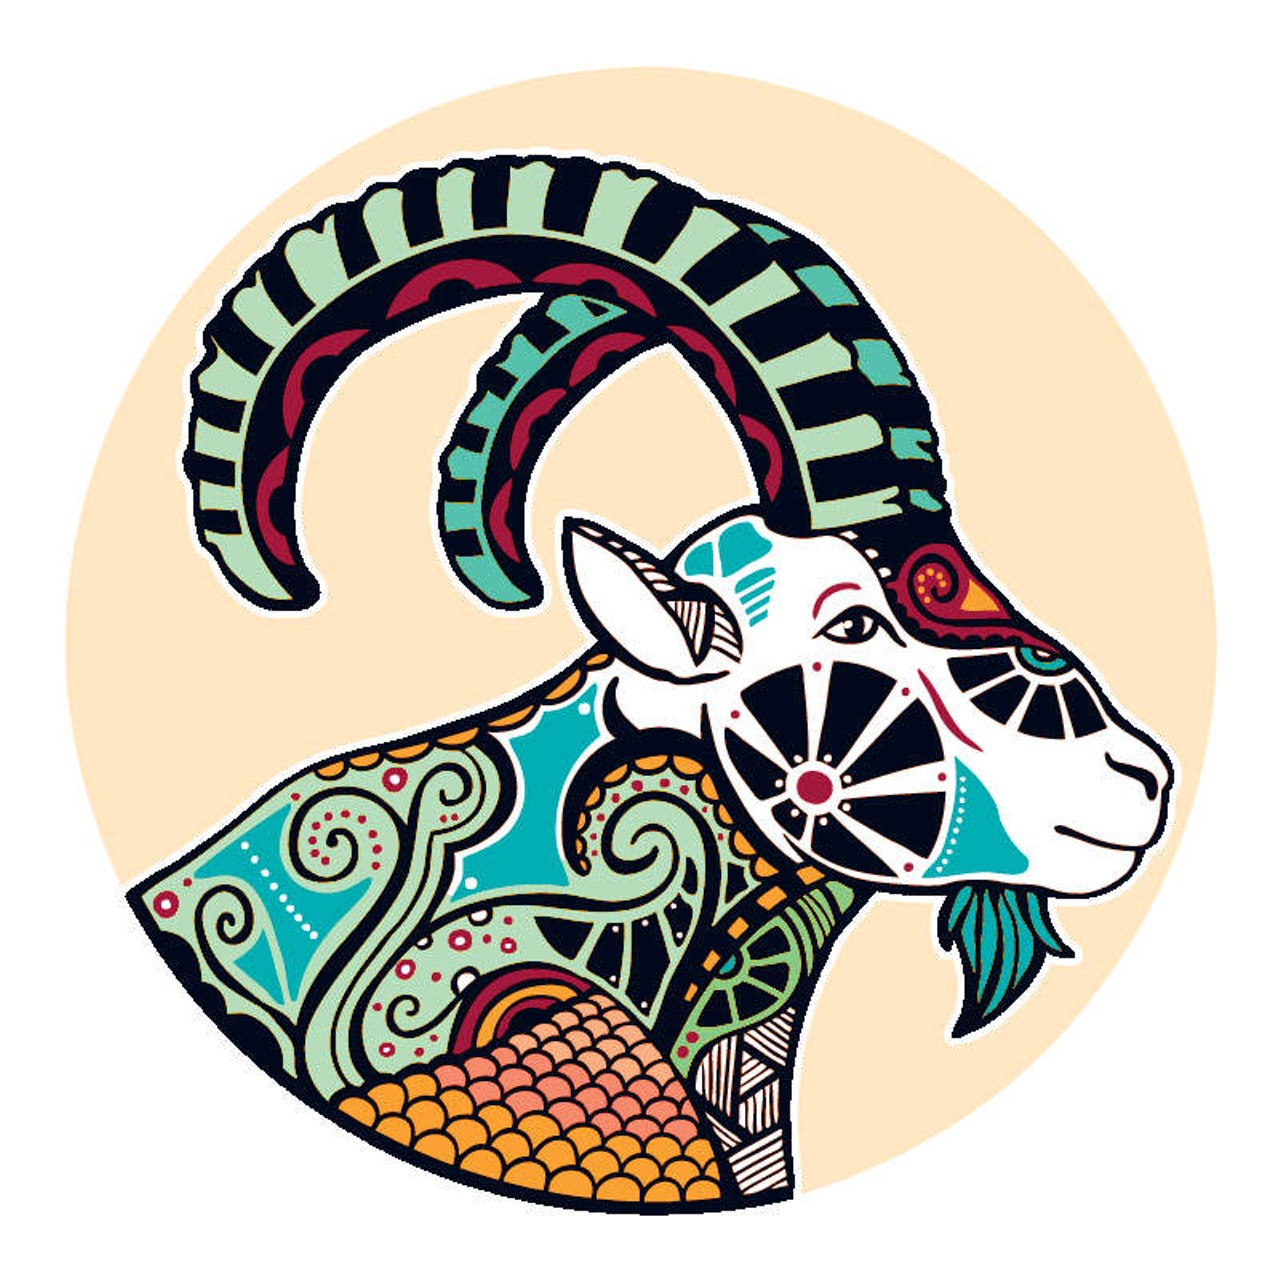 CAPRICORN (Dec. 21-Jan. 20): You are still on a roll, trying to catch up with things that have turned your life into a runaway train. It might be wise to slow everything down and lay low until you see what's going on. The idea that you need to be all business could be illusory; it all depends. This time around, it is the energetic component that may have more to say about where your plans wind up than how good you are at goose-stepping around. Big deals could easily show up out of the blue. Will they come to pass? Remain vigilant. The who, what, when, and how of all of that is entirely up to you.